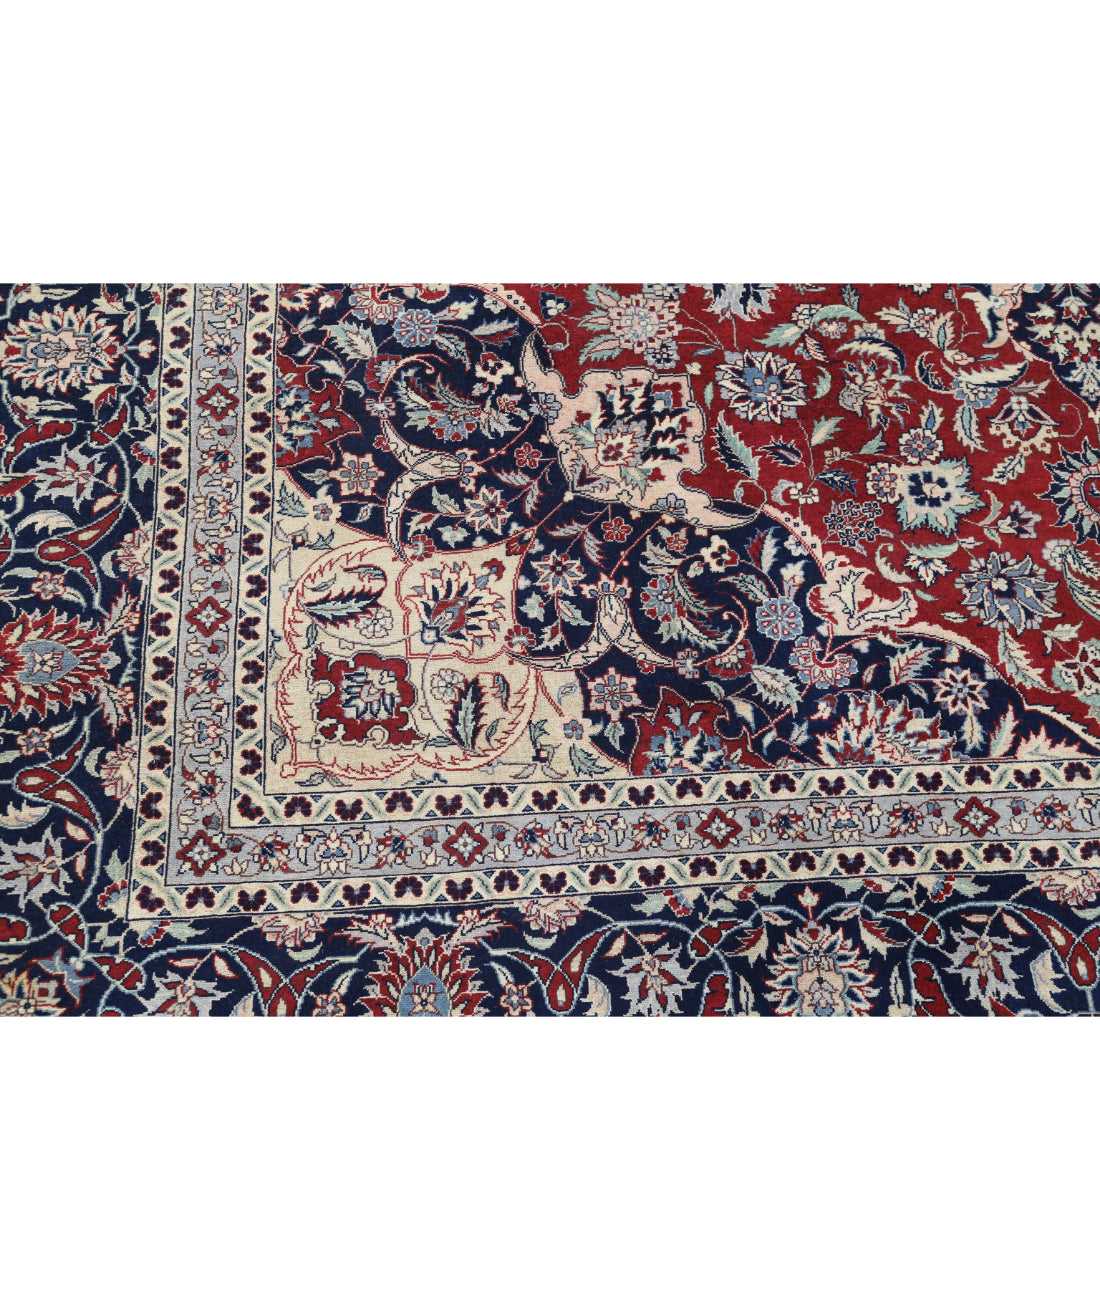 Heritage 8'1'' X 9'11'' Hand-Knotted Wool Rug 8'1'' x 9'11'' (243 X 298) / Red / Blue